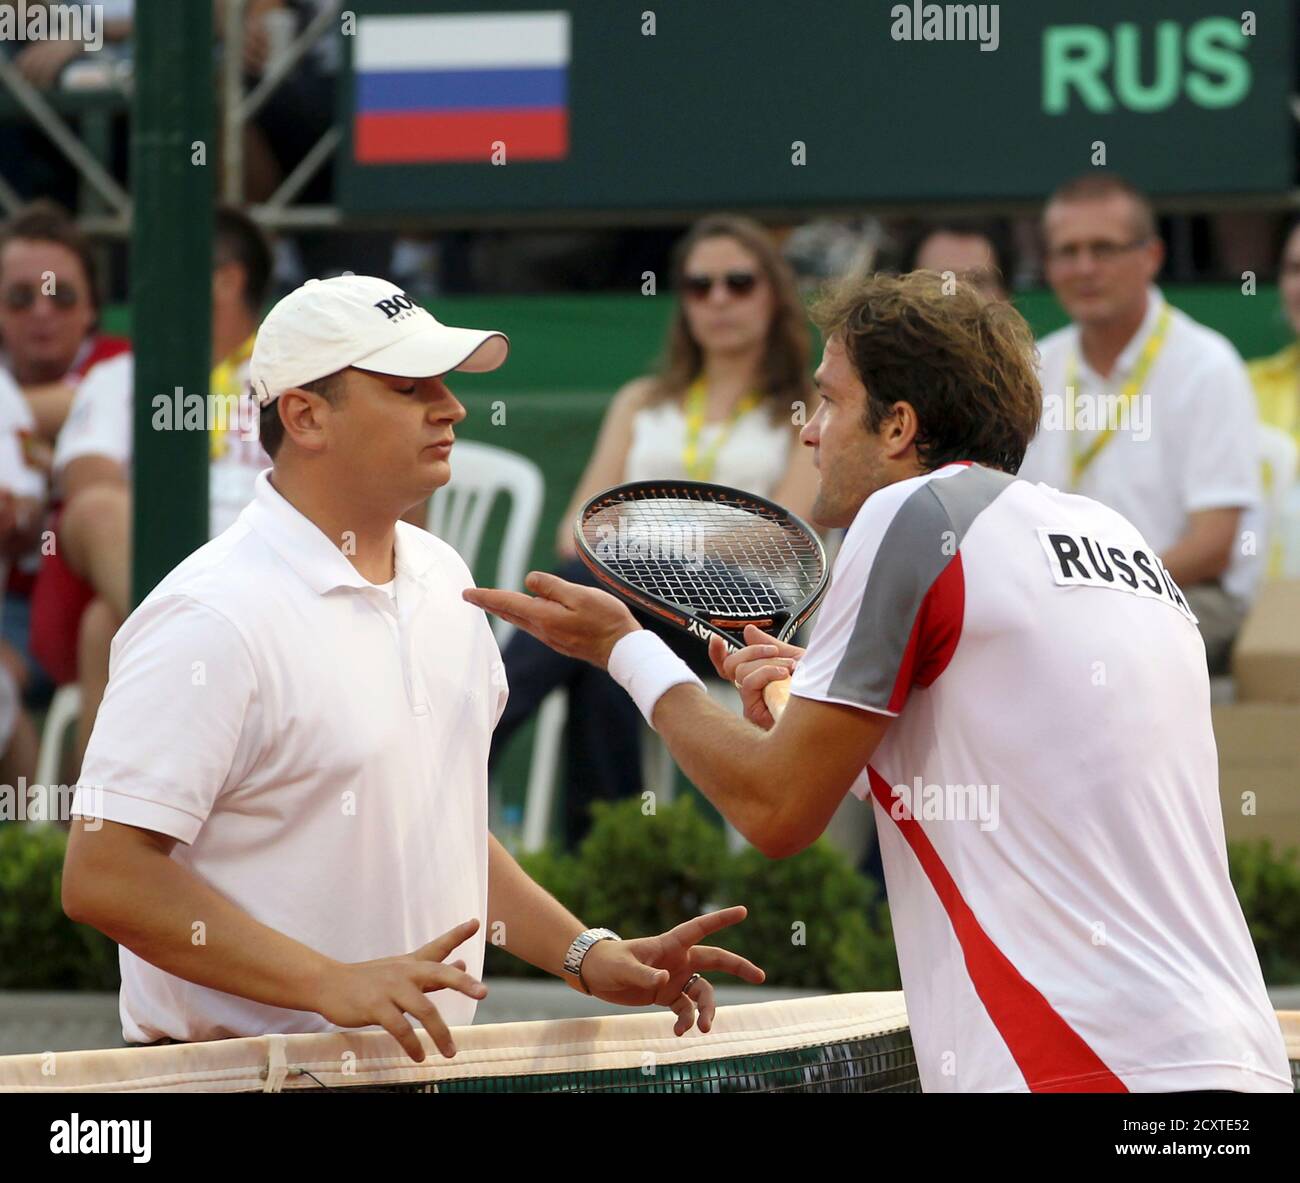 Teymuraz Gabashvil of Russia (R) argues with chair umpire Jake Garner of  U.S. during his Davis Cup World Group play-off tennis match against Thomaz  Bellucci of Brazil in Sao Jose do Rio